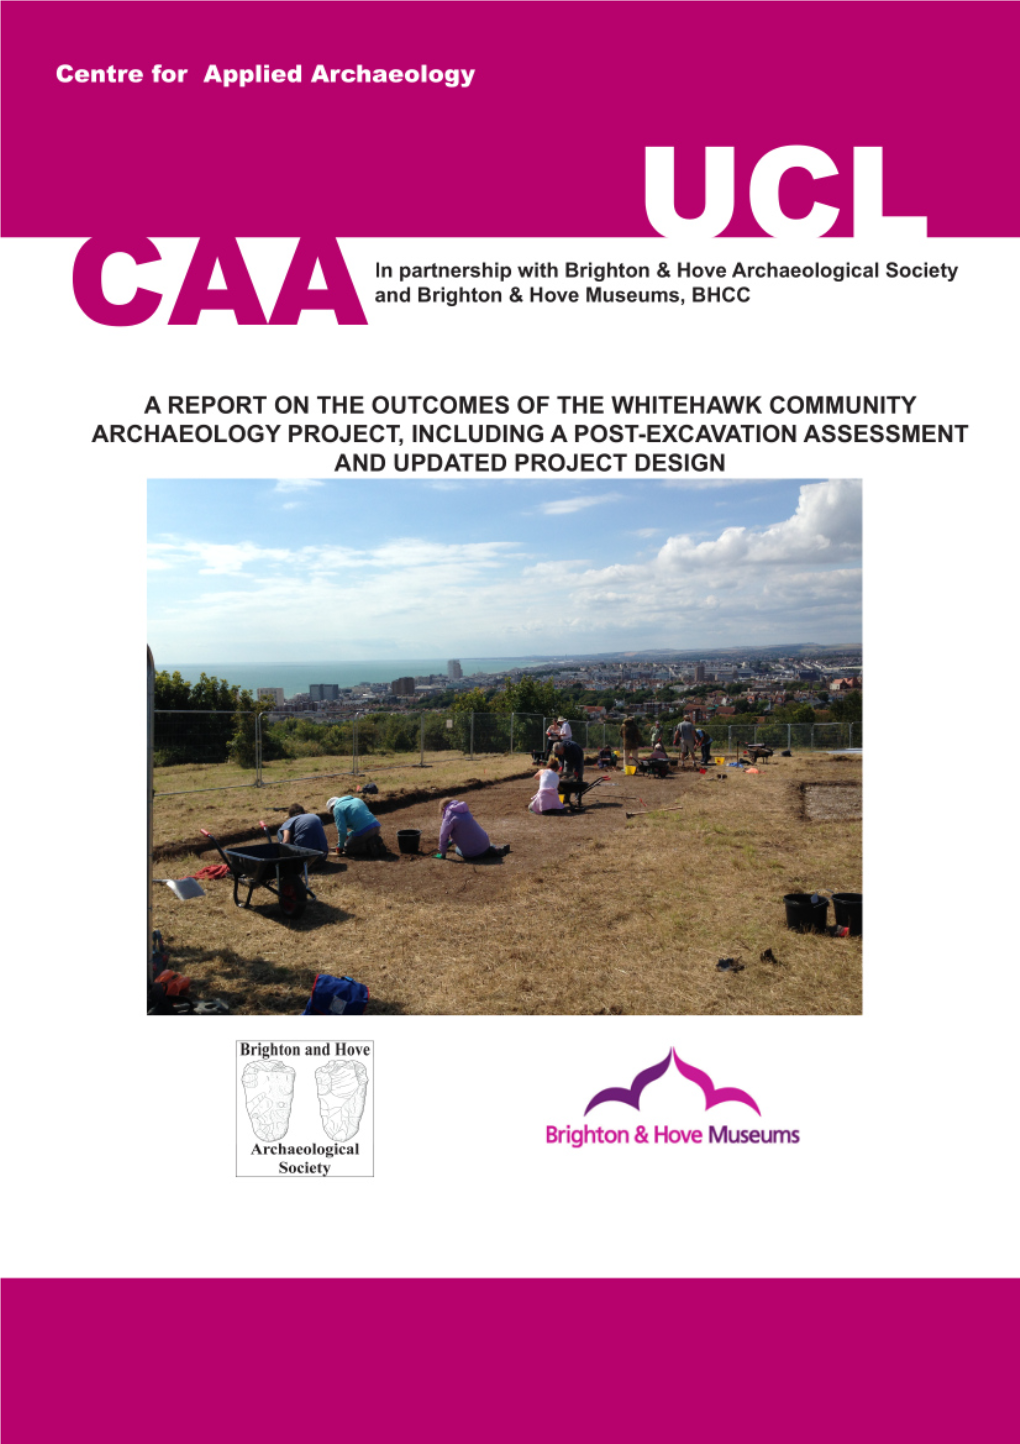 A Report on the Outcomes of the Whitehawk Community Archaeology Project, Including a Post-Excavation Assessment and Updated Project Design